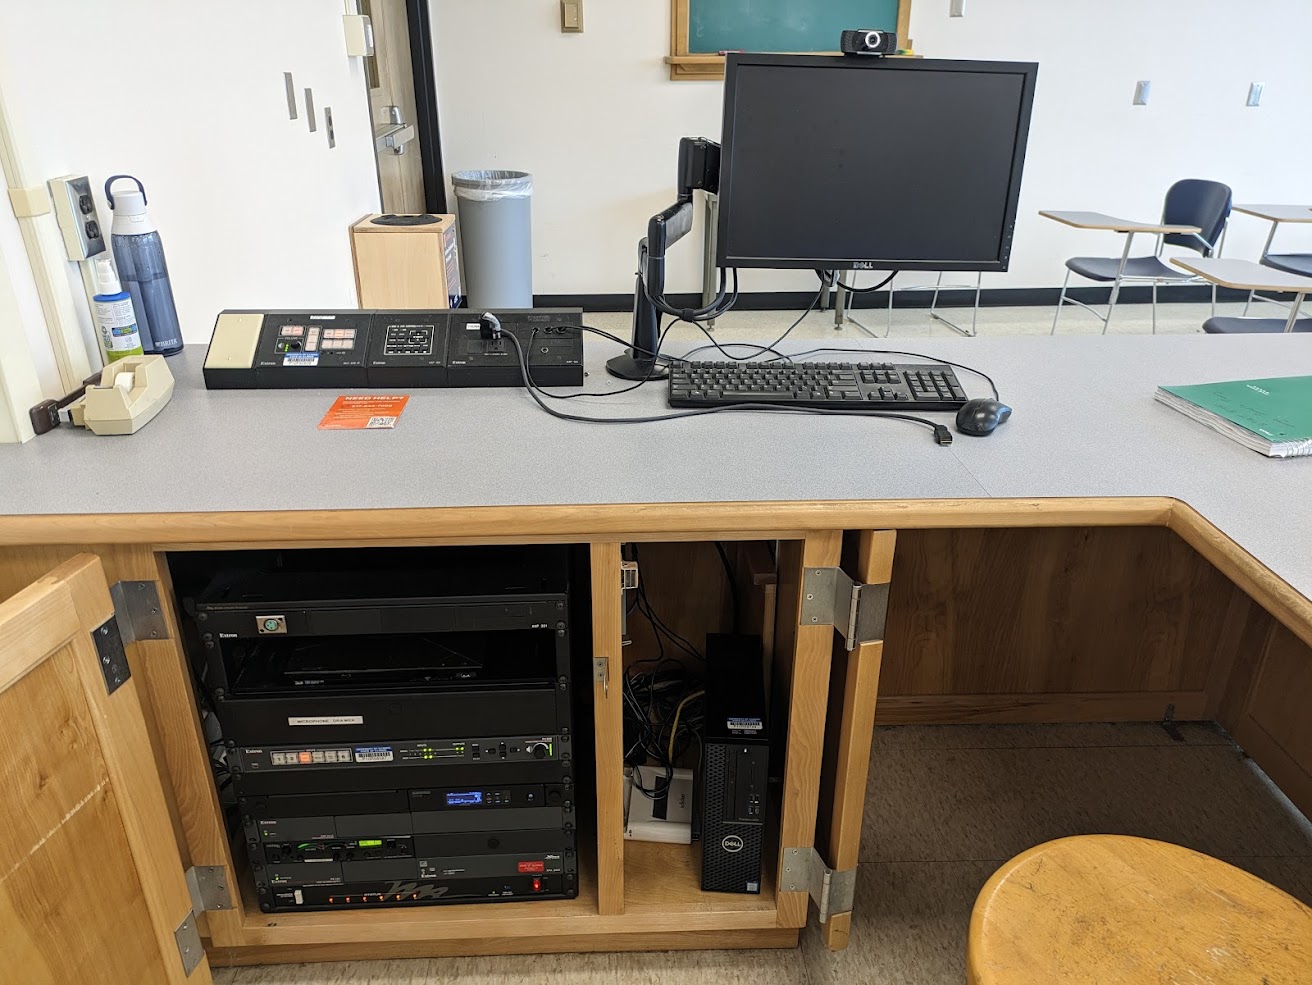 A view of the open cabinet with computer monitor, HDMI input, push button controller, and audio visual rack.